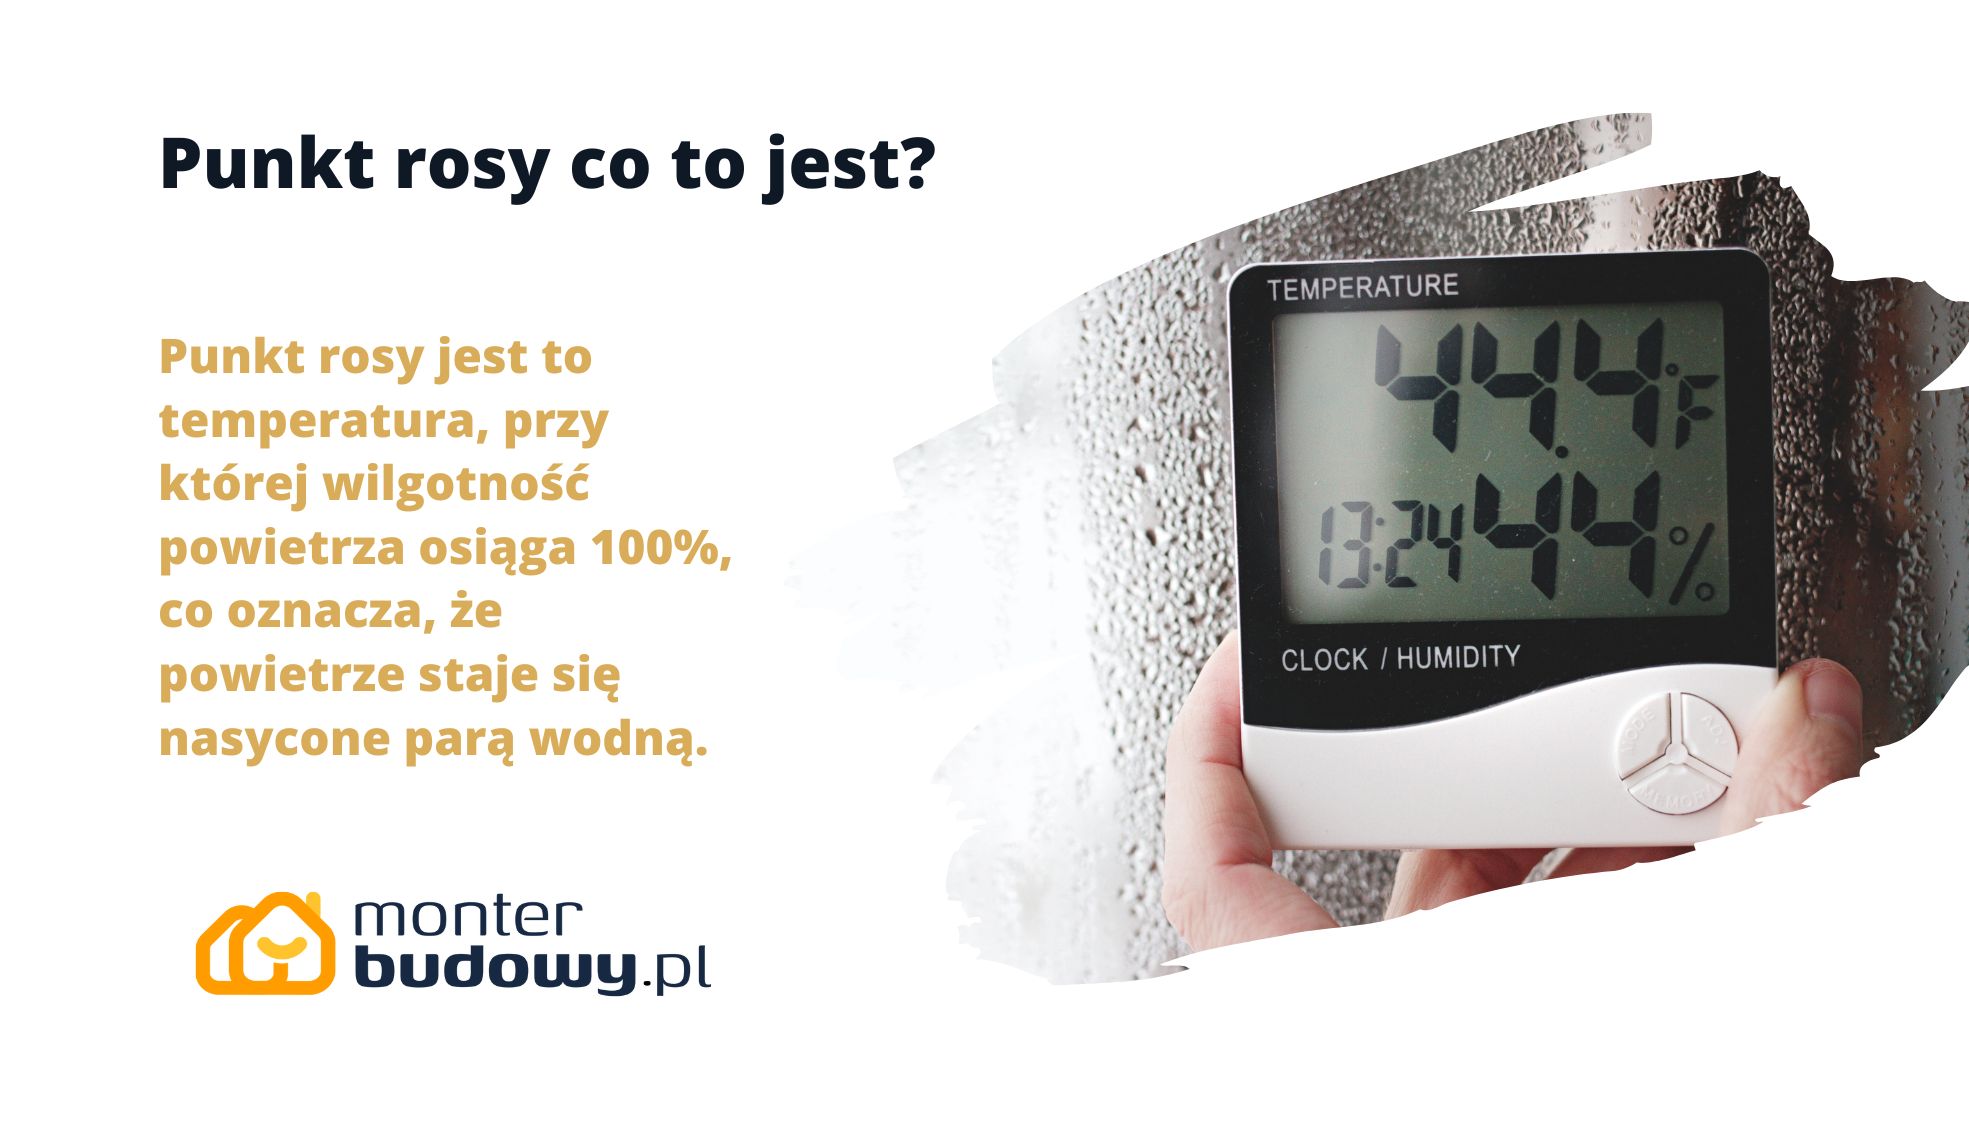 Punkt rosy co to jest